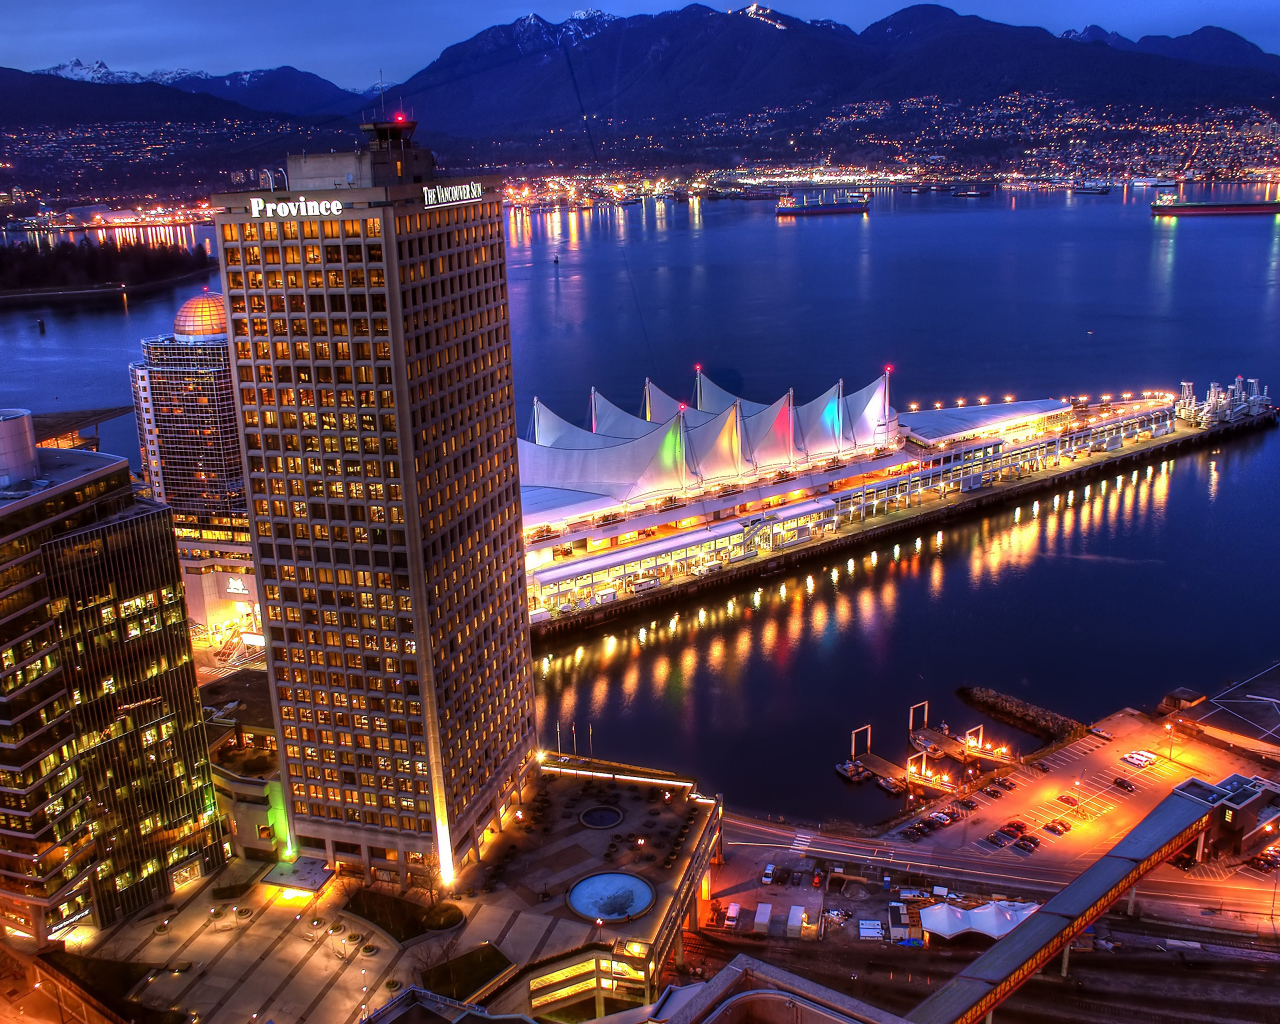 The city of Vancouver, in the evening